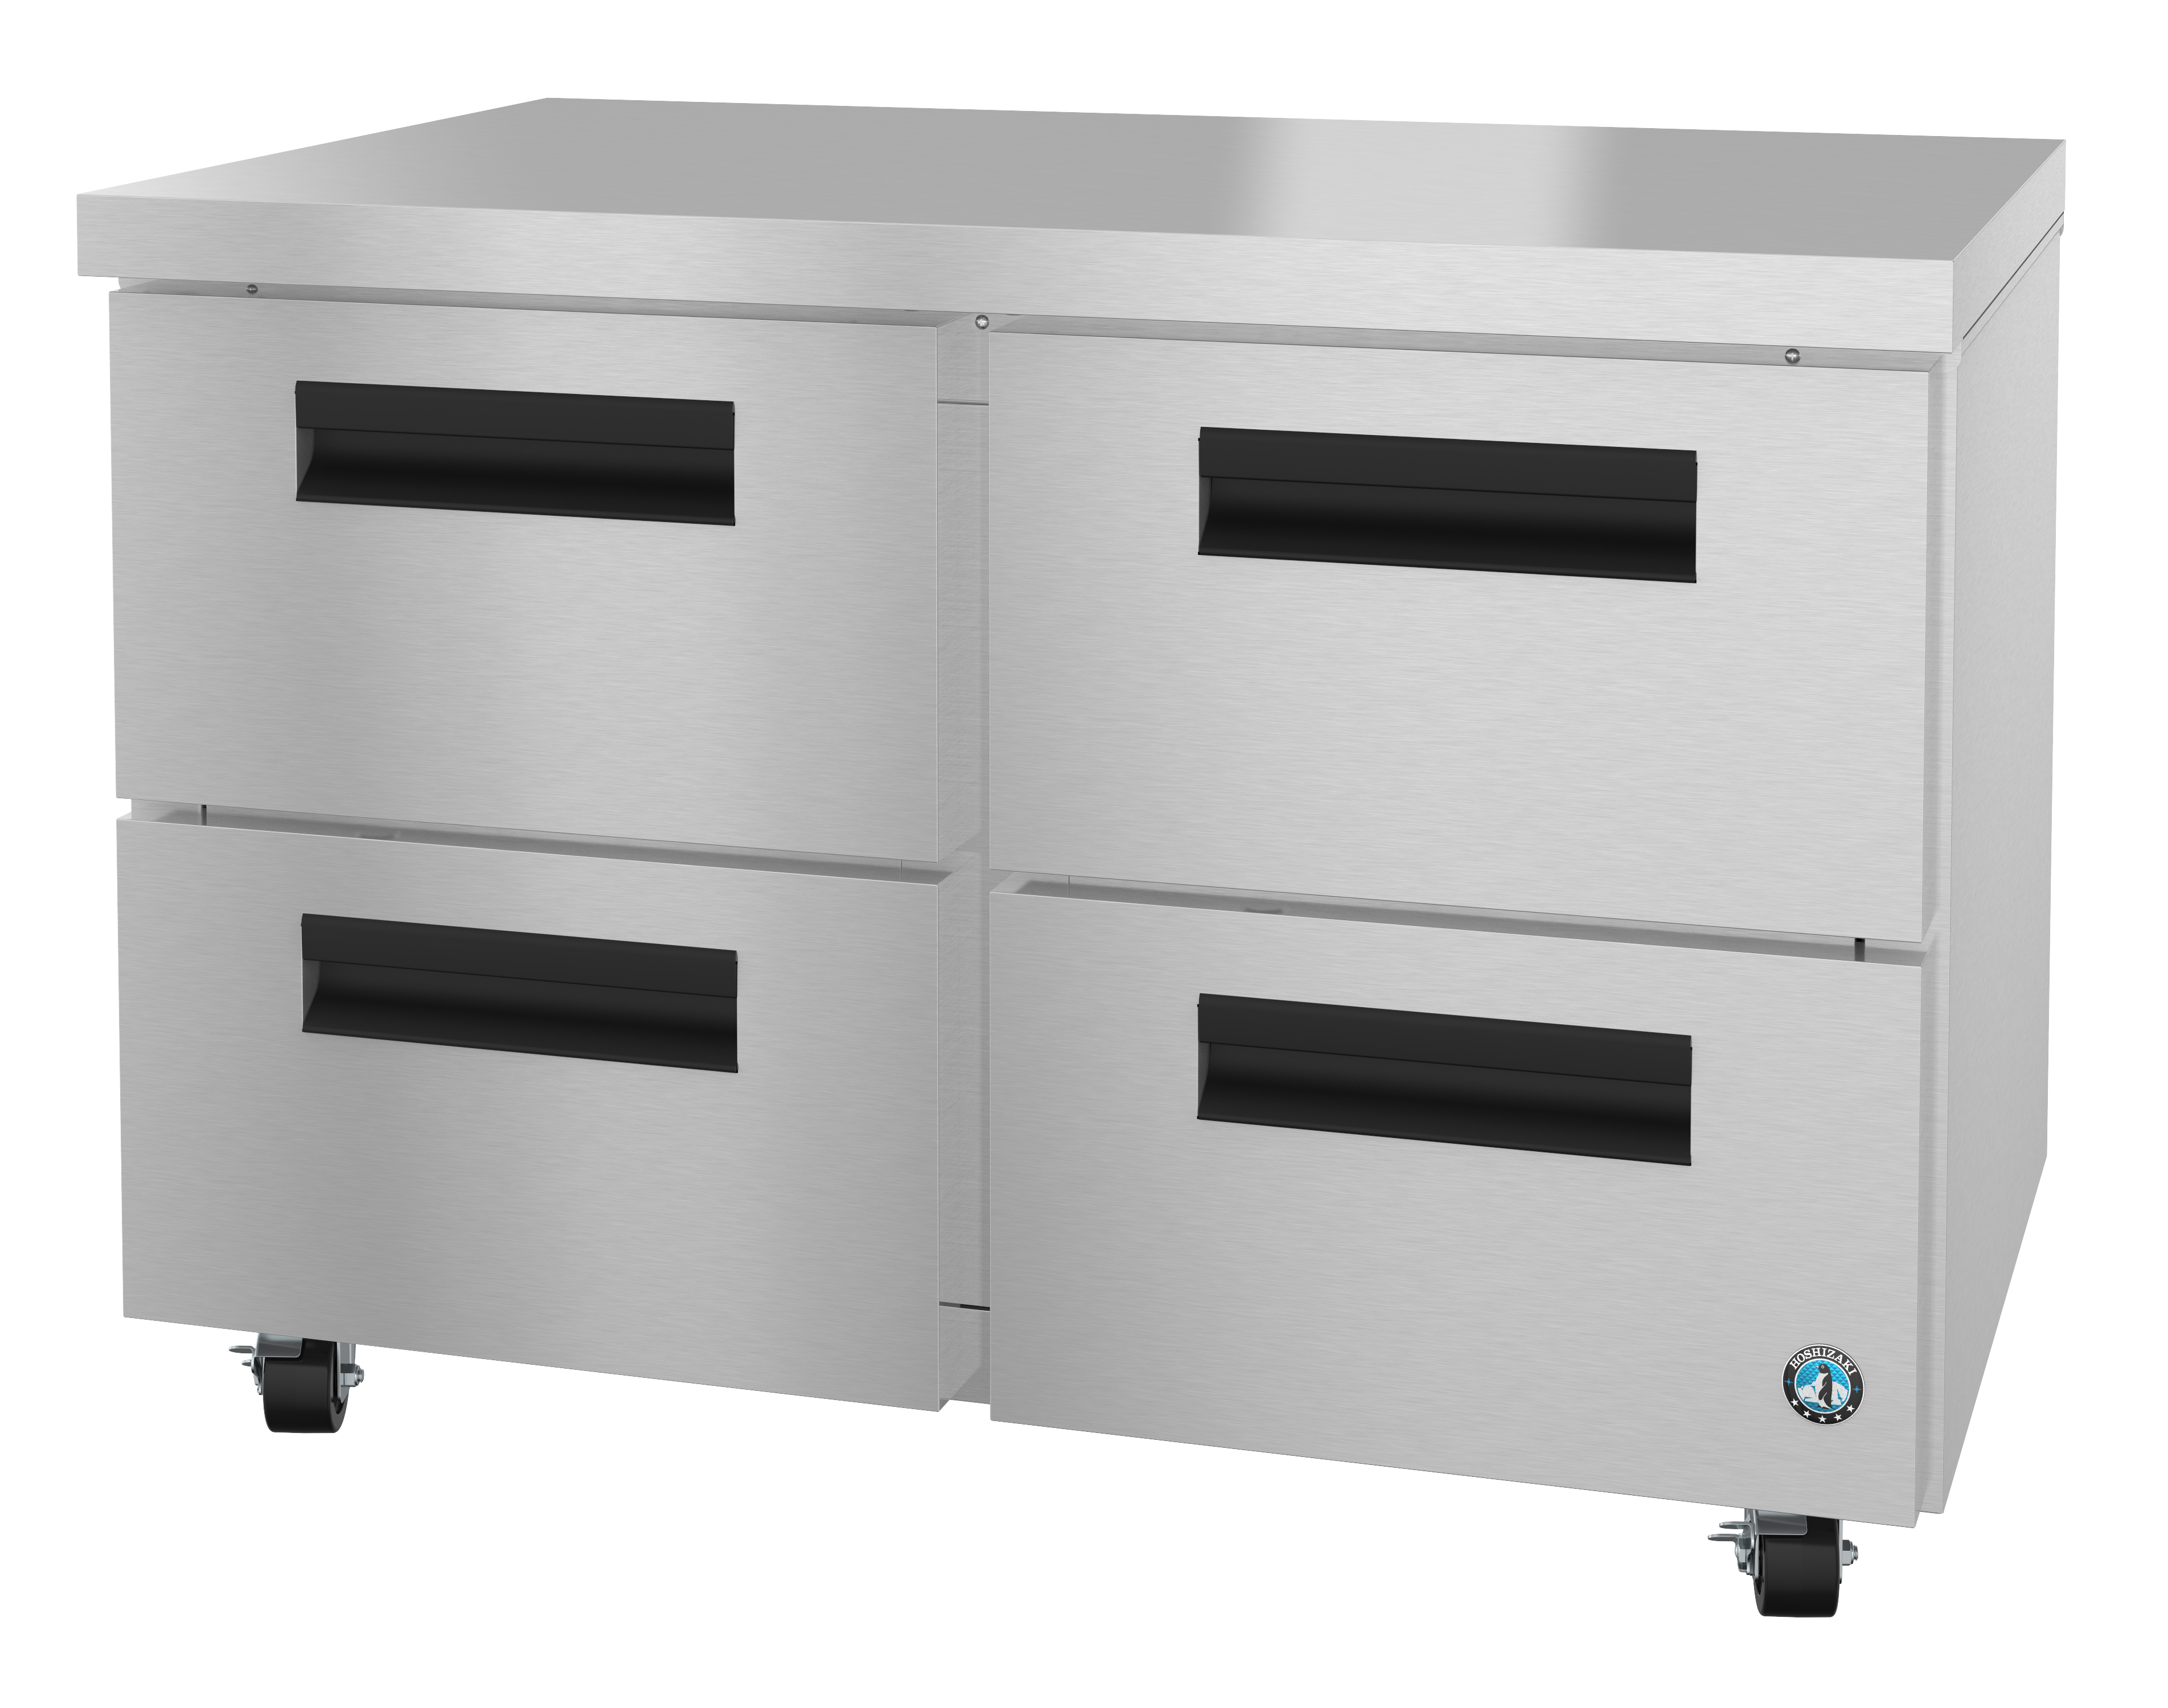 CRMR48-D4, Refrigerator, Two Section Undercounter, Stainless Drawers